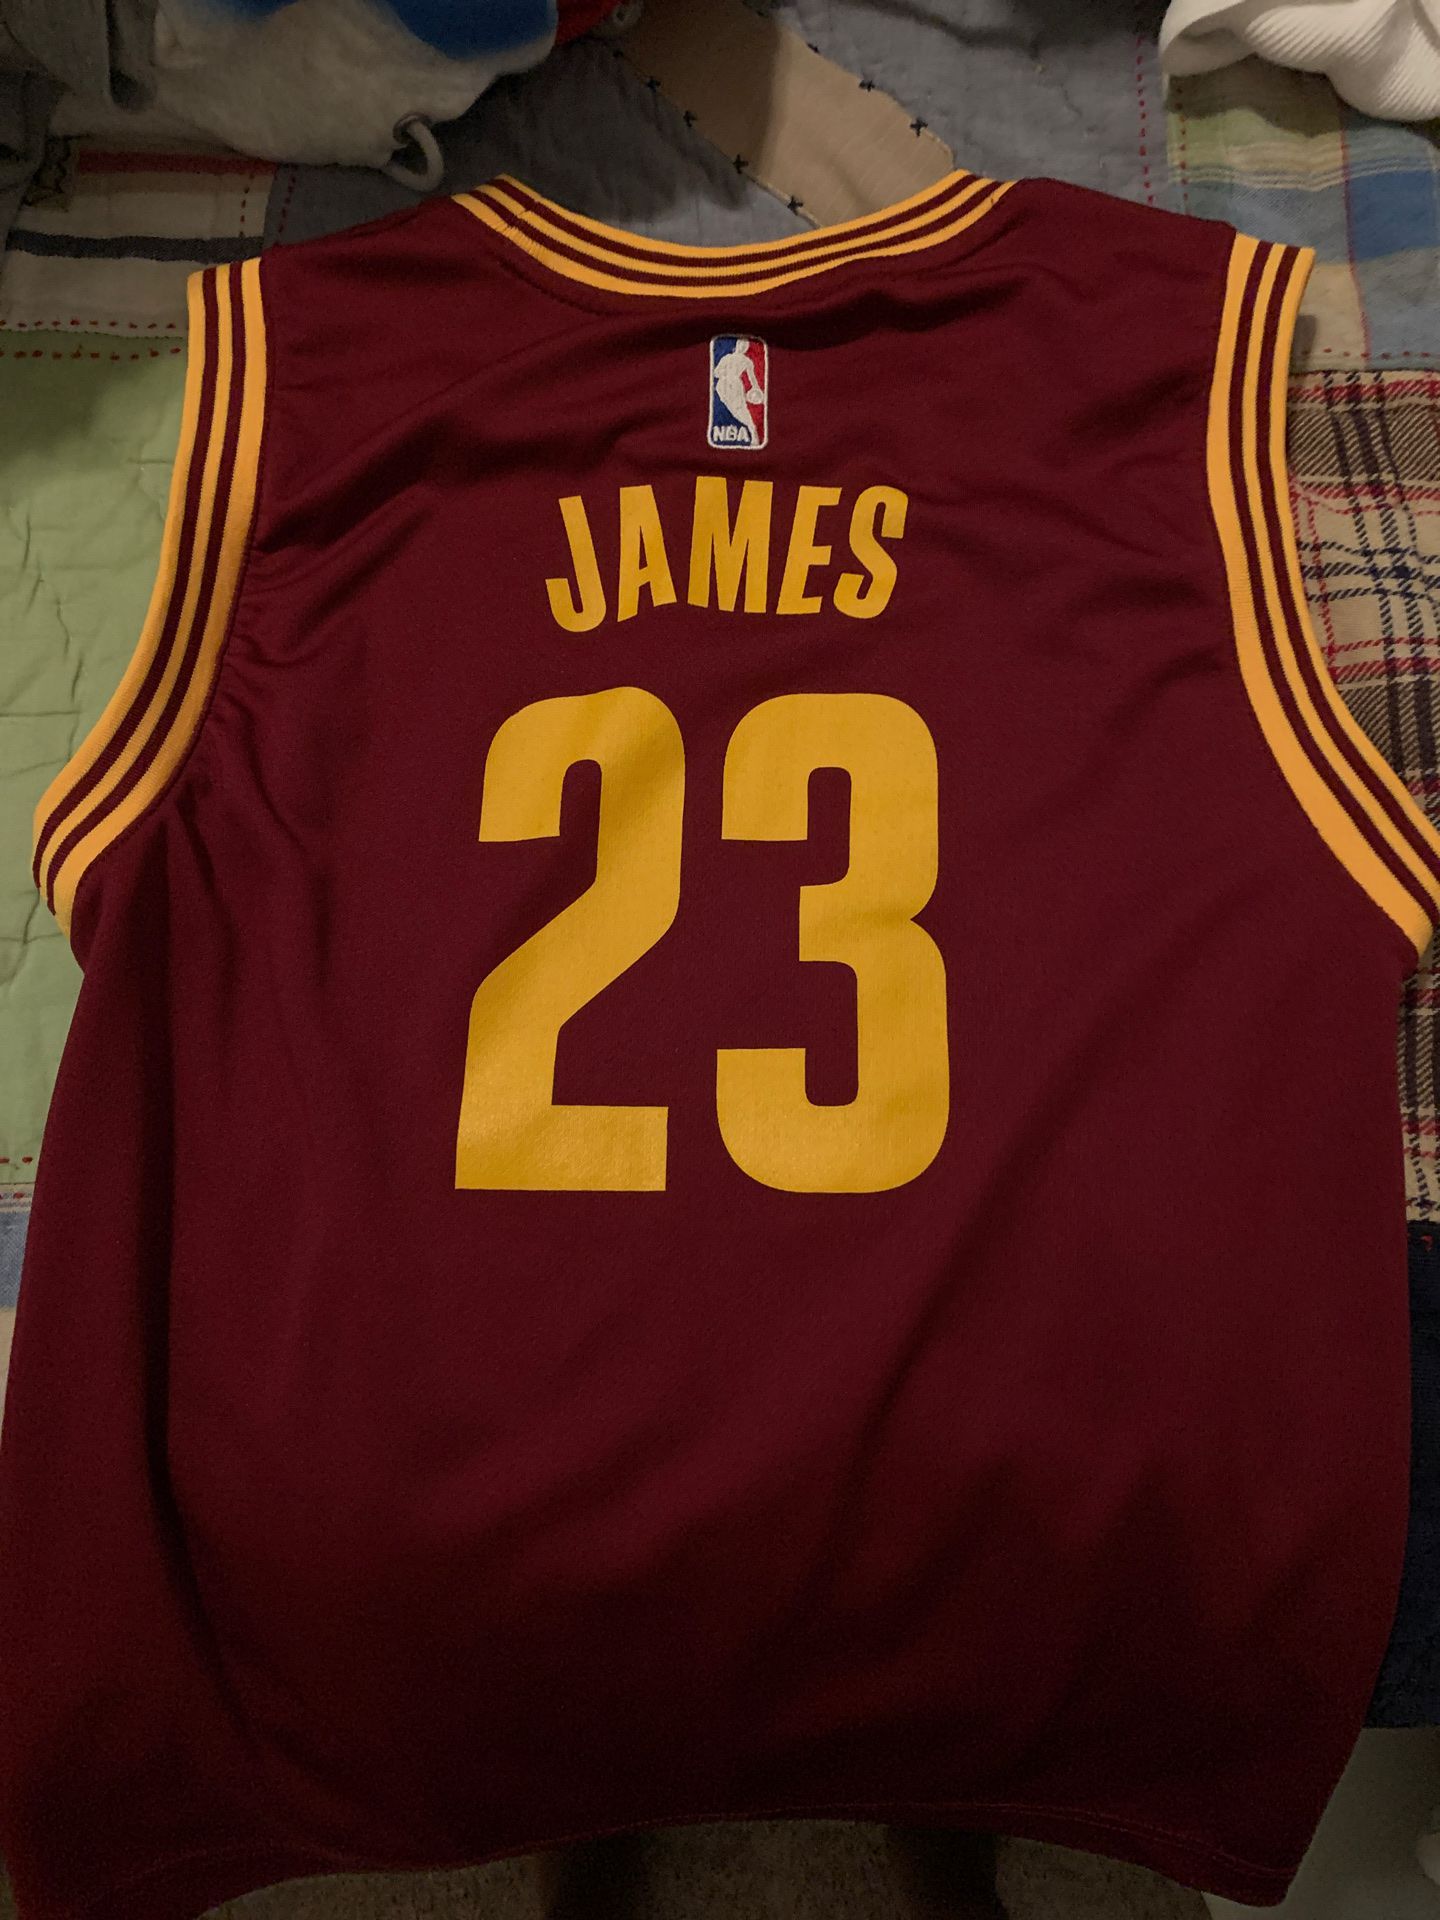 Adidas Lebron James Classic jersey 23 for Sale in Richmond, TX - OfferUp